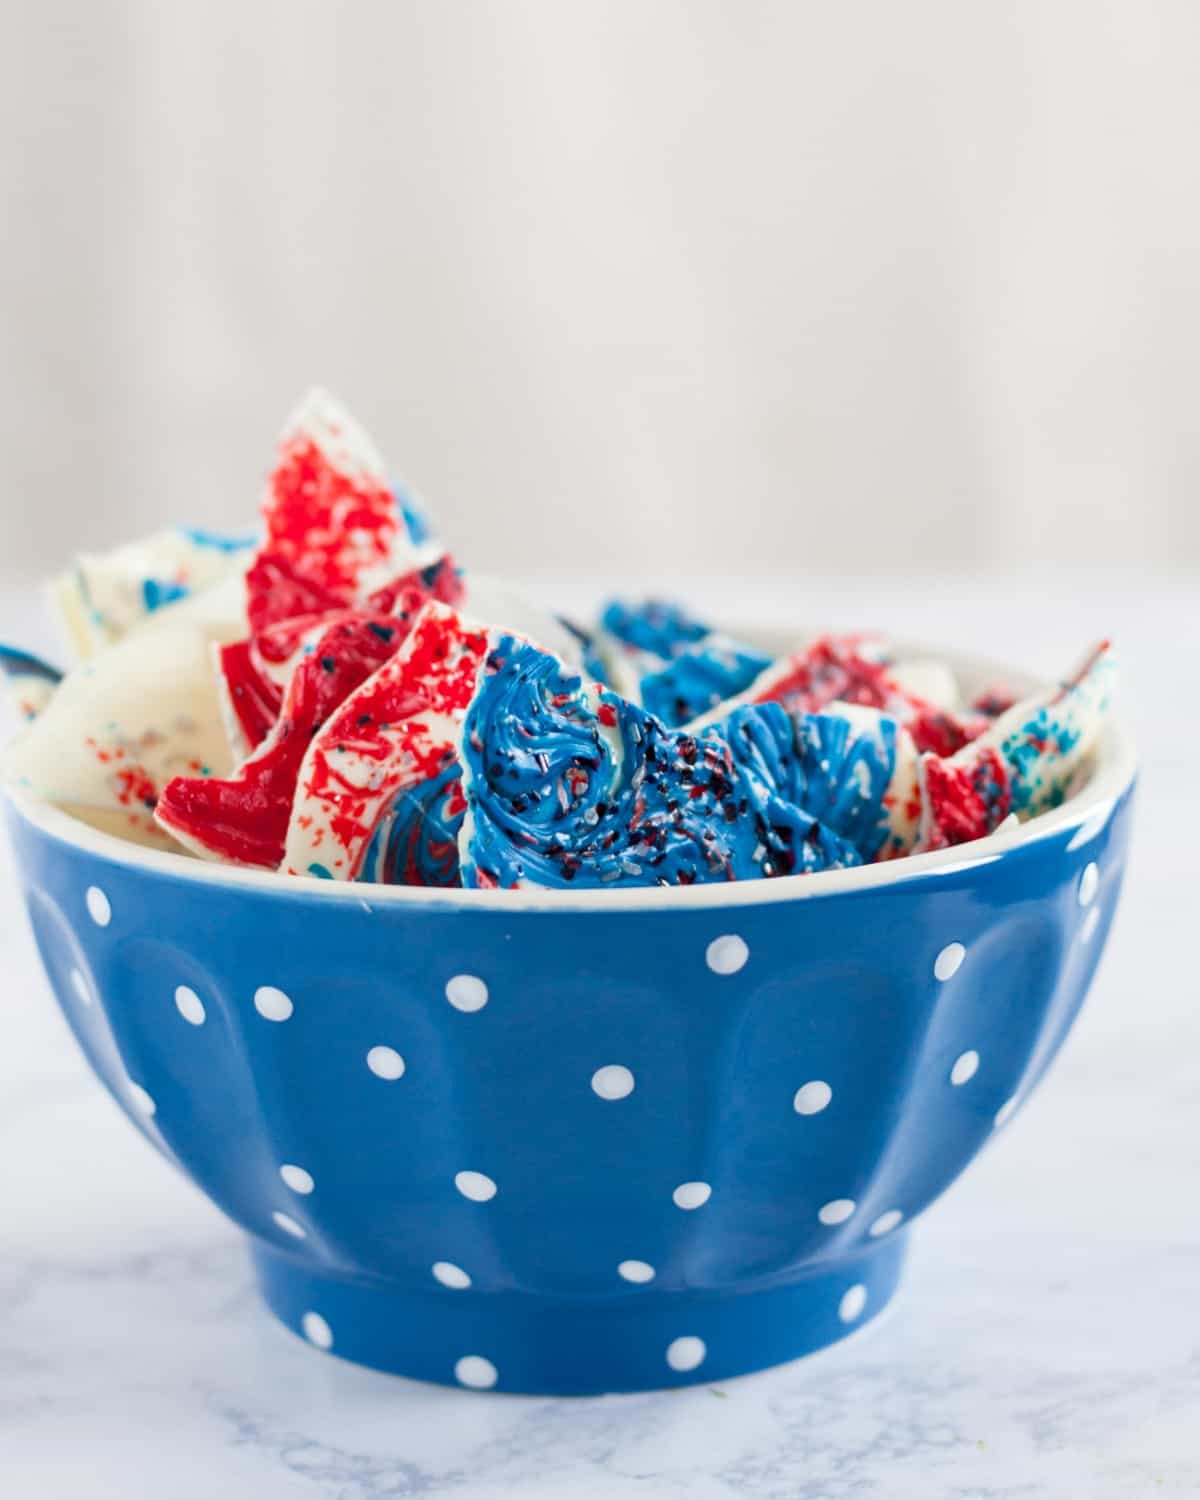 This fireworks inspired bark is a simple no bake dessert perfect to make with kids for any patriotic holiday. * How-to and video on GoodieGodmother.com